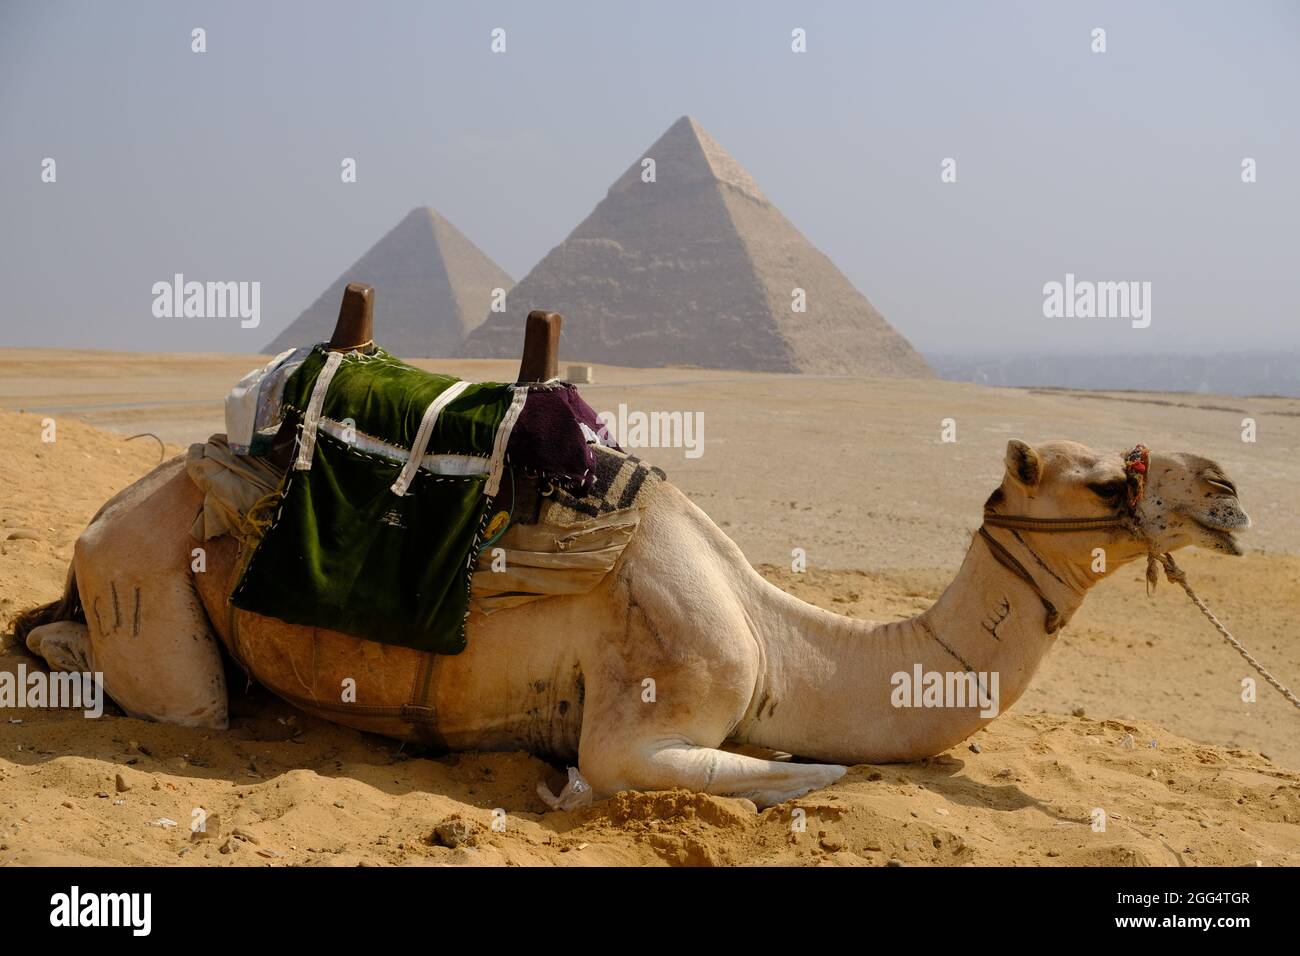 Egypt Cairo - Tour Camel and The Great Pyramid of Giza plus Pyramid of Khafre Stock Photo